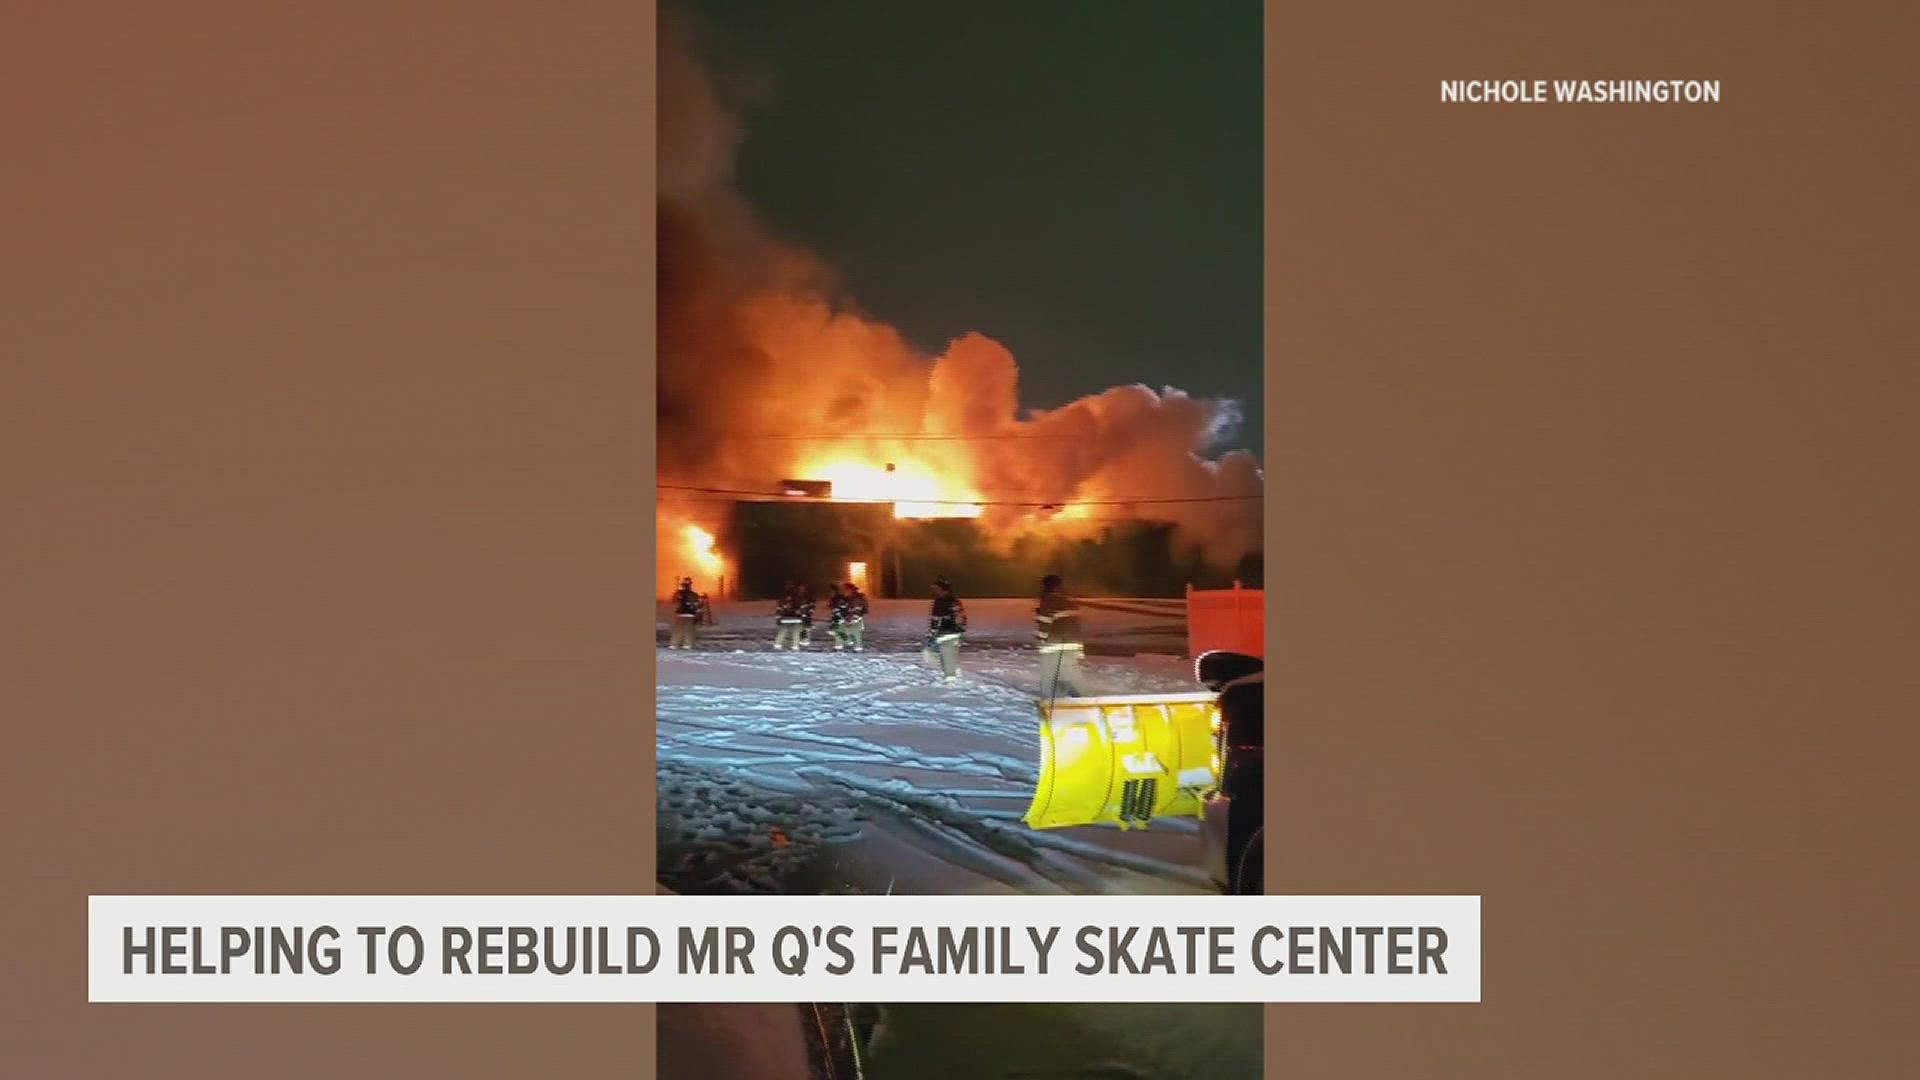 The fundraiser will be at Roll 'R' Way Family Skating Center and all admission proceeds will go to the rebuilding cause.